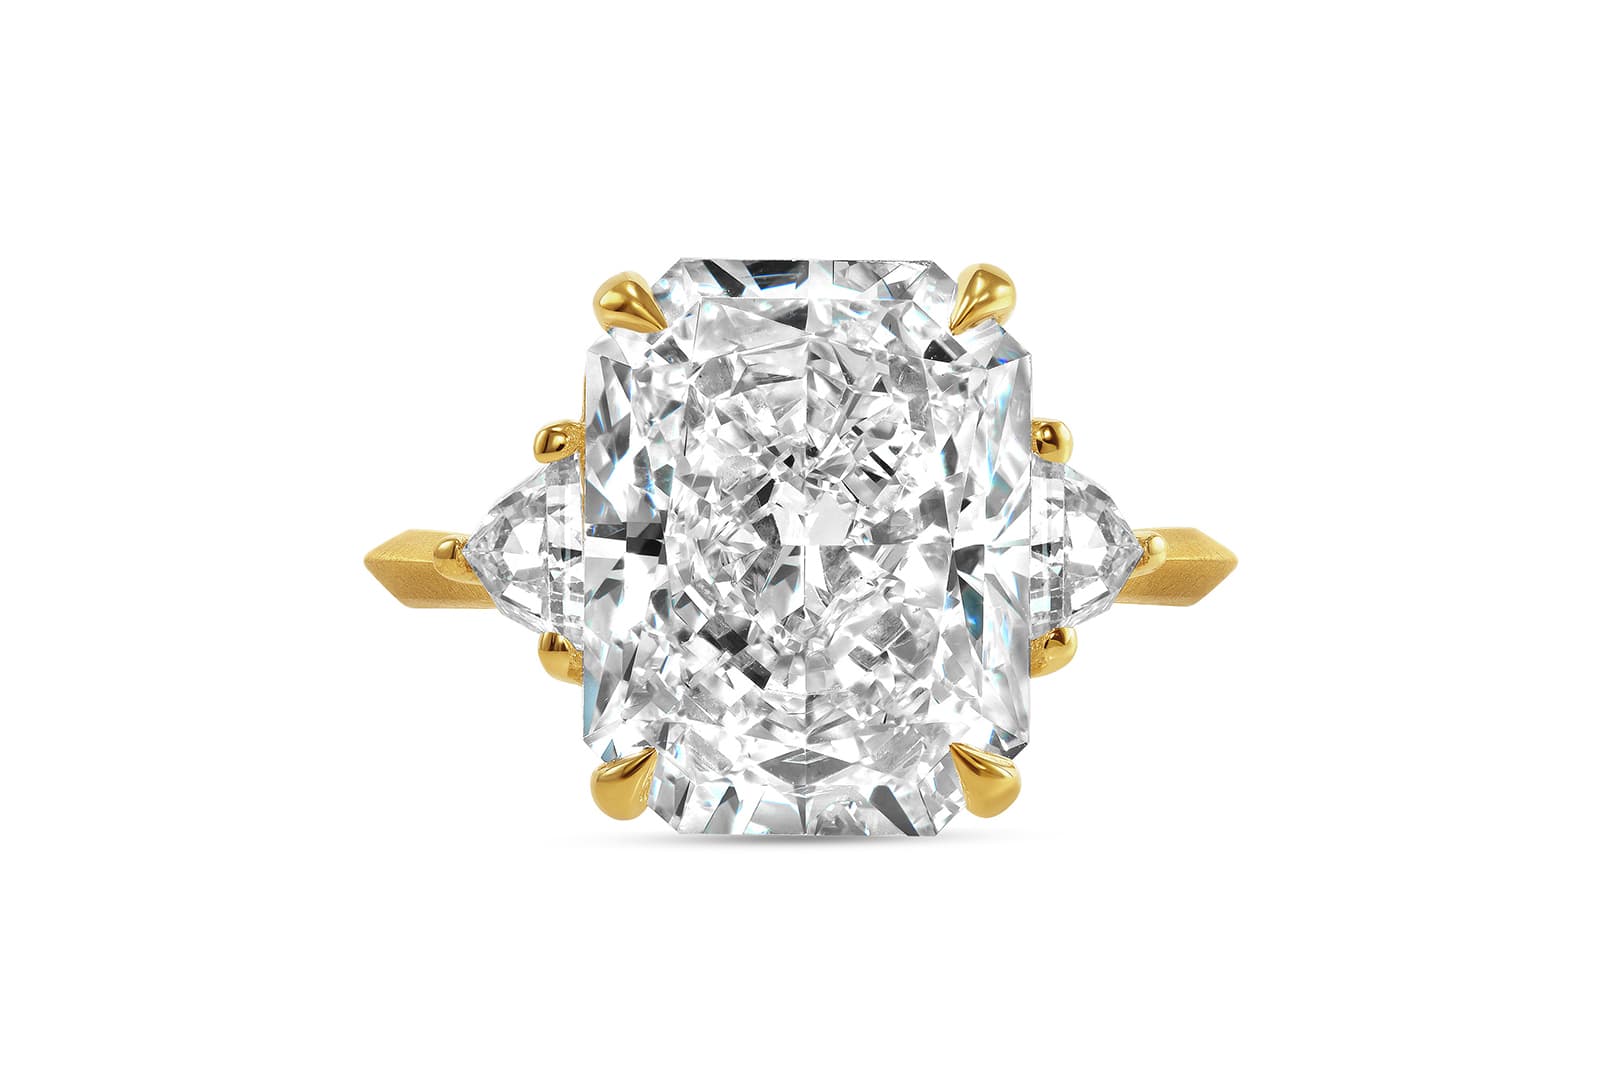 IceRock Diamonds specialises in generously proportioned engagement rings and bespoke diamond rings